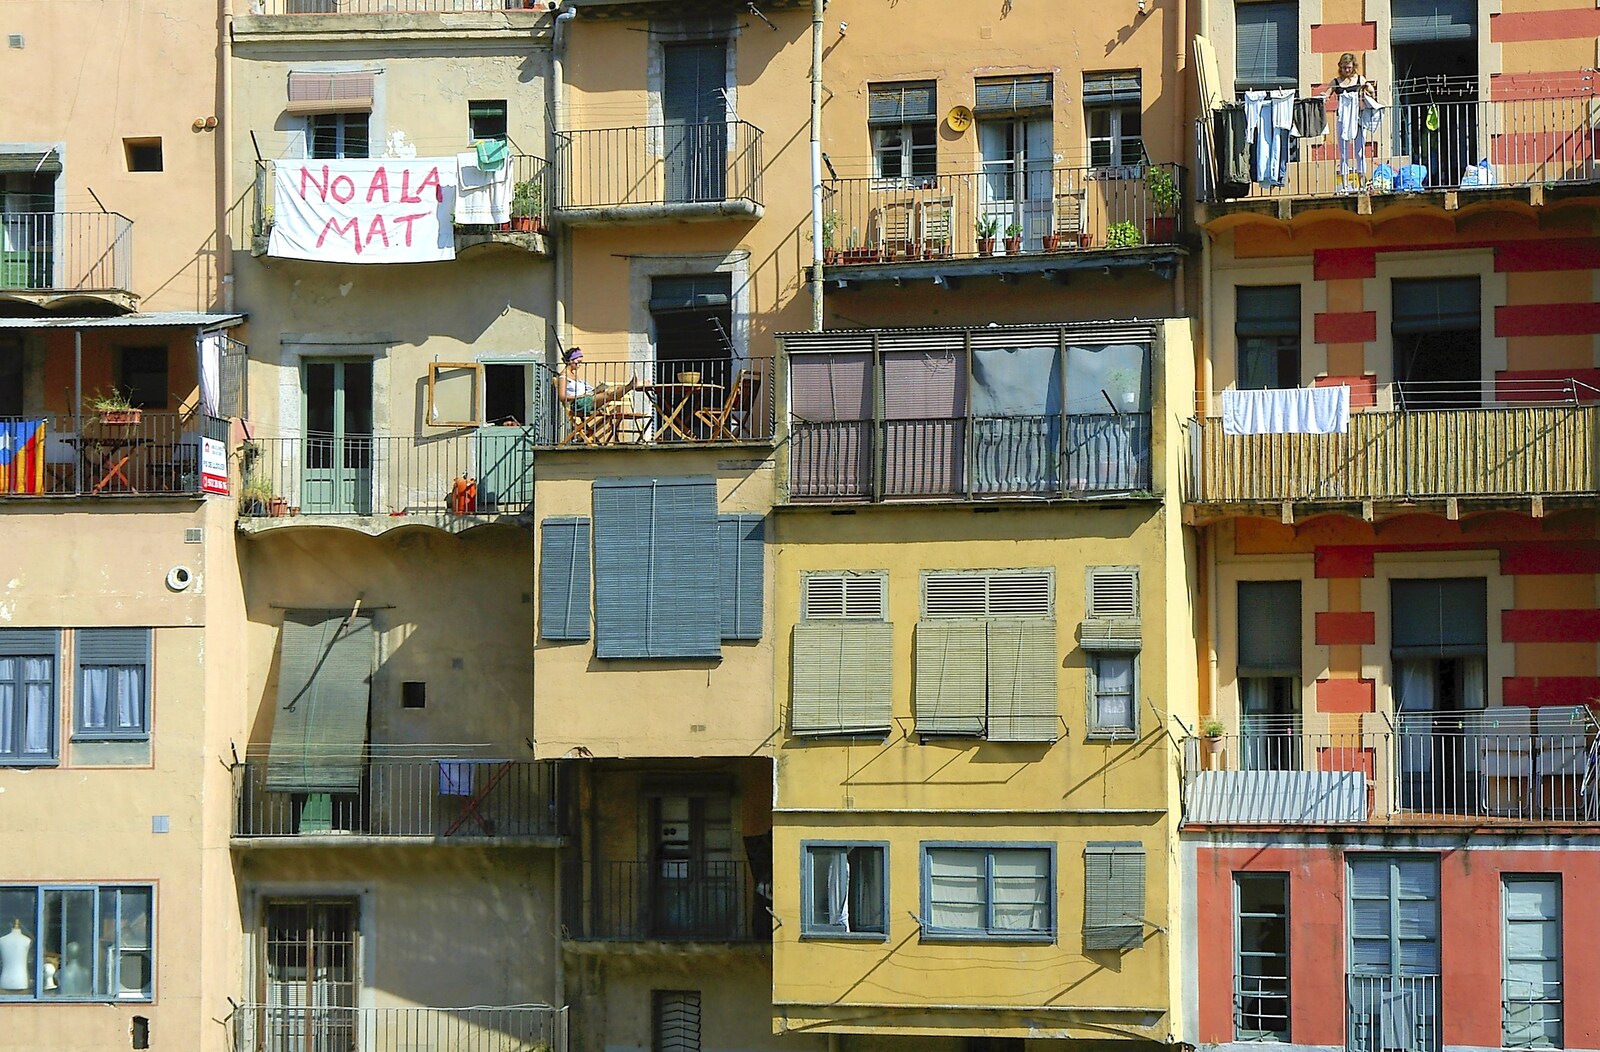 A protest banner flutters in the warm breeze from Girona, Catalunya, Spain - 17th September 2006